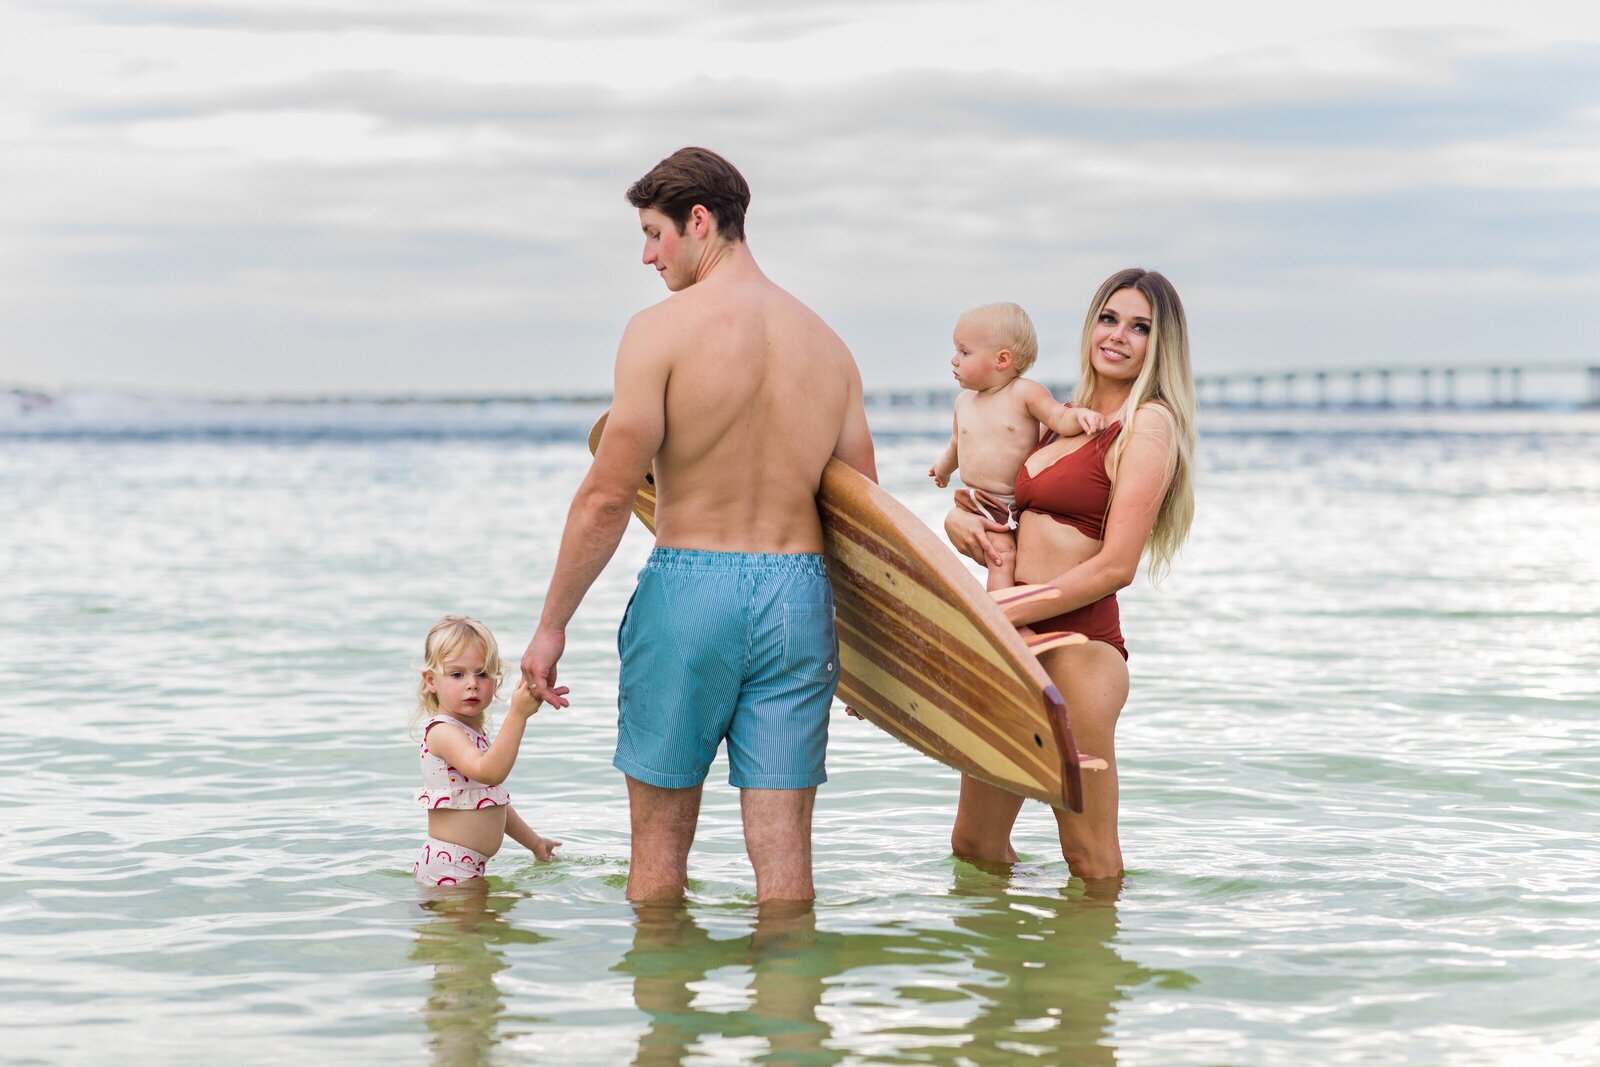 Destin  vacation family photo session . Family playing in the water.